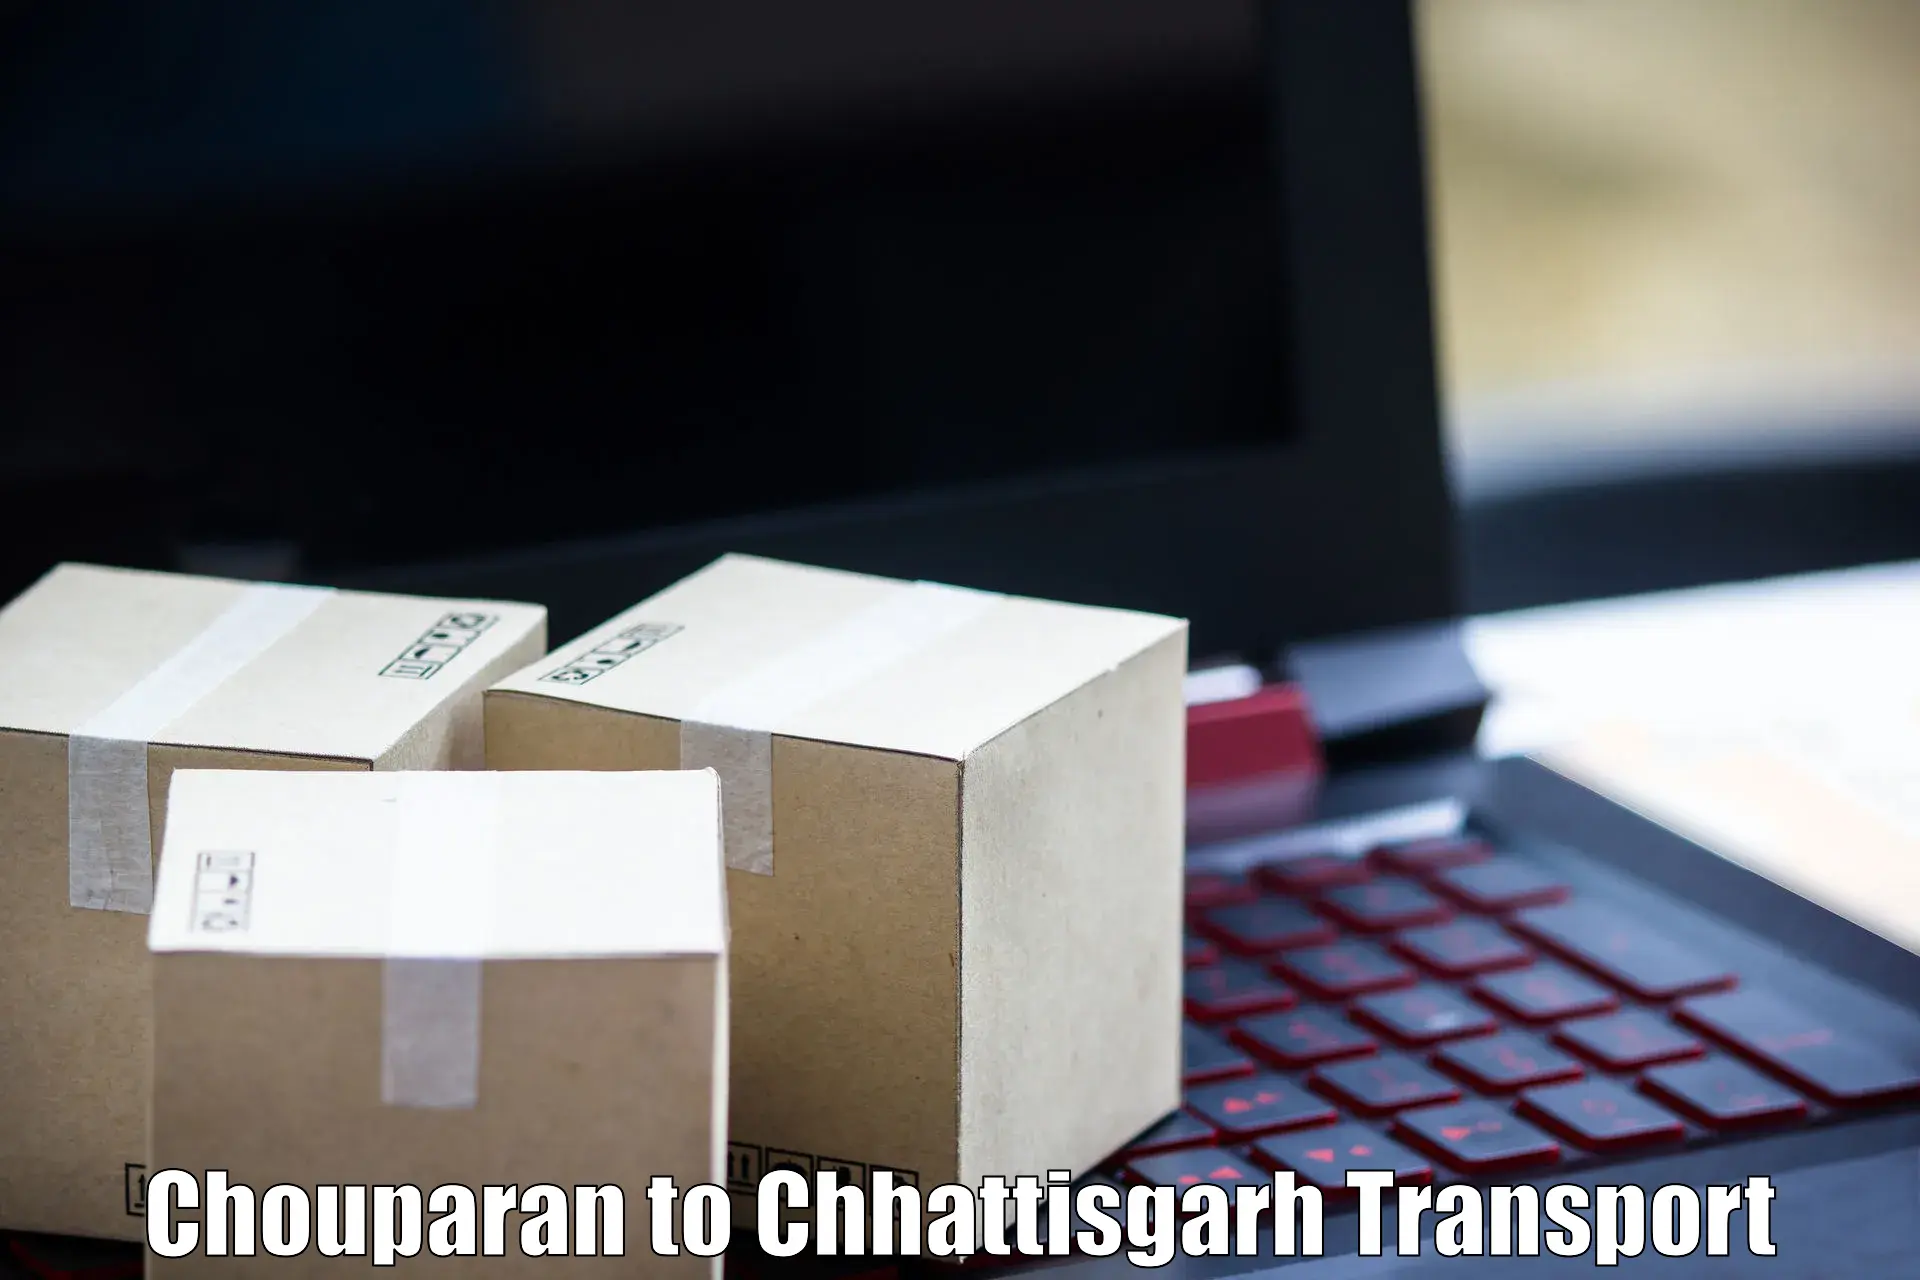 Truck transport companies in India Chouparan to Bhatgaon